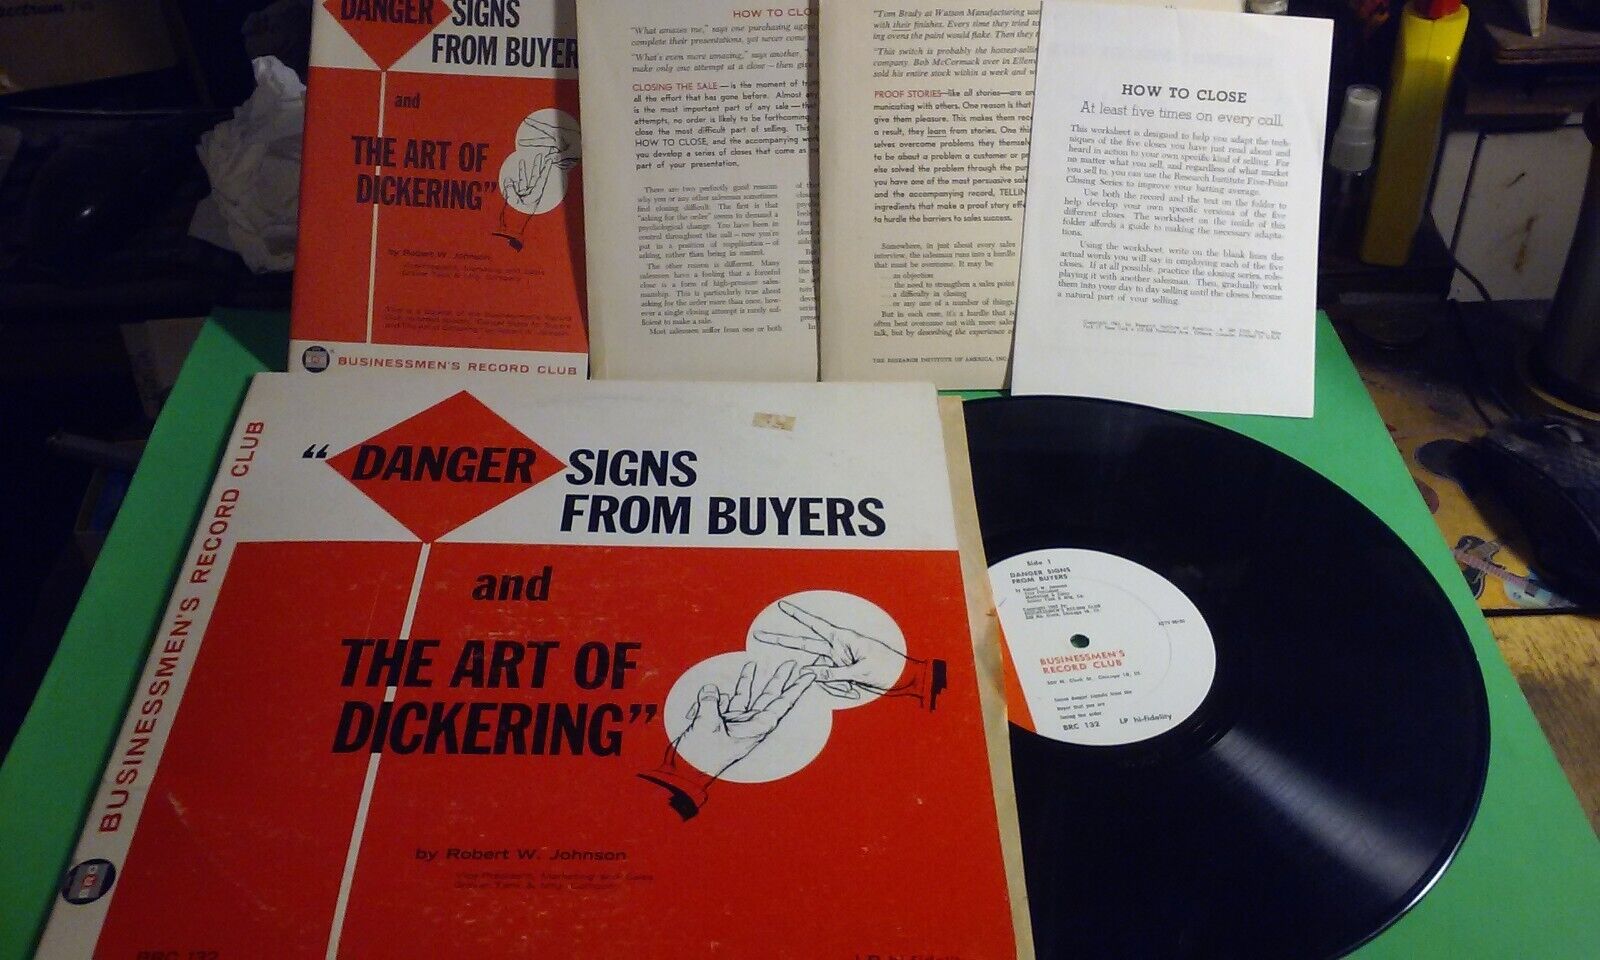 Danger Signs From Buyers by Robert W. Johnson LP & Booklets 1963 Vintage Sales